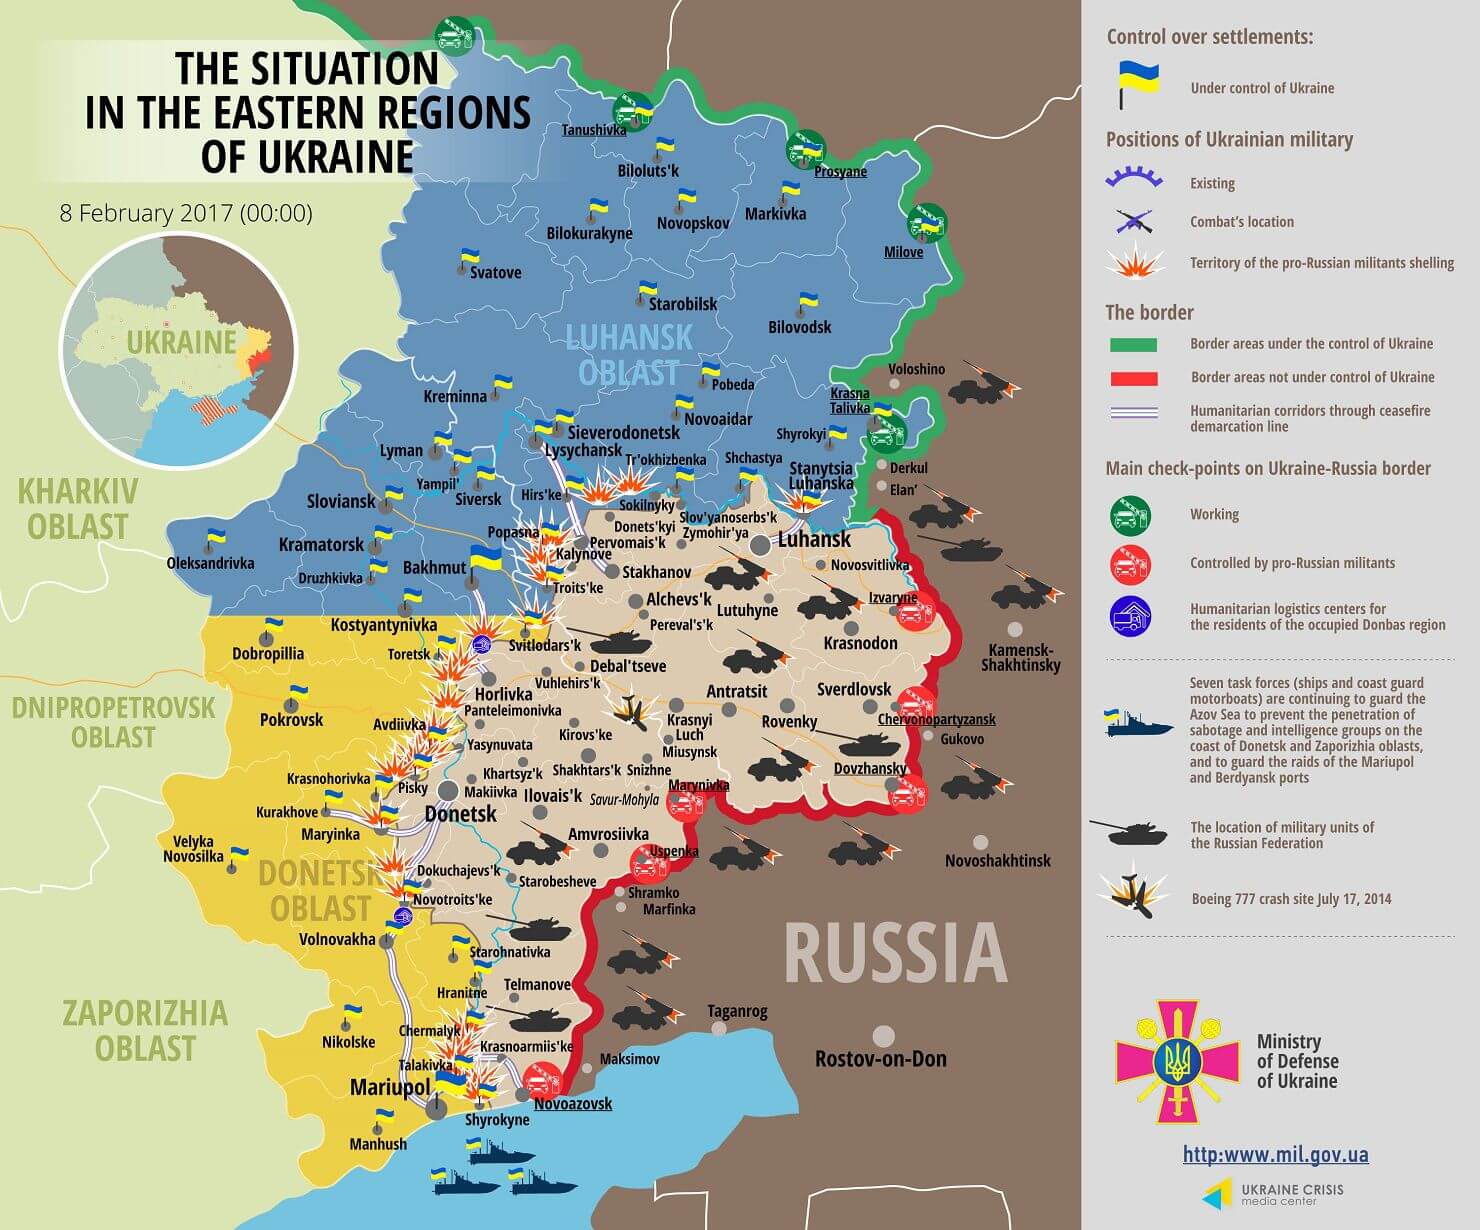 Russian troops attacked Ukrainian positions 90 times in Donbas using heavy armor along the entire frontline in the last day